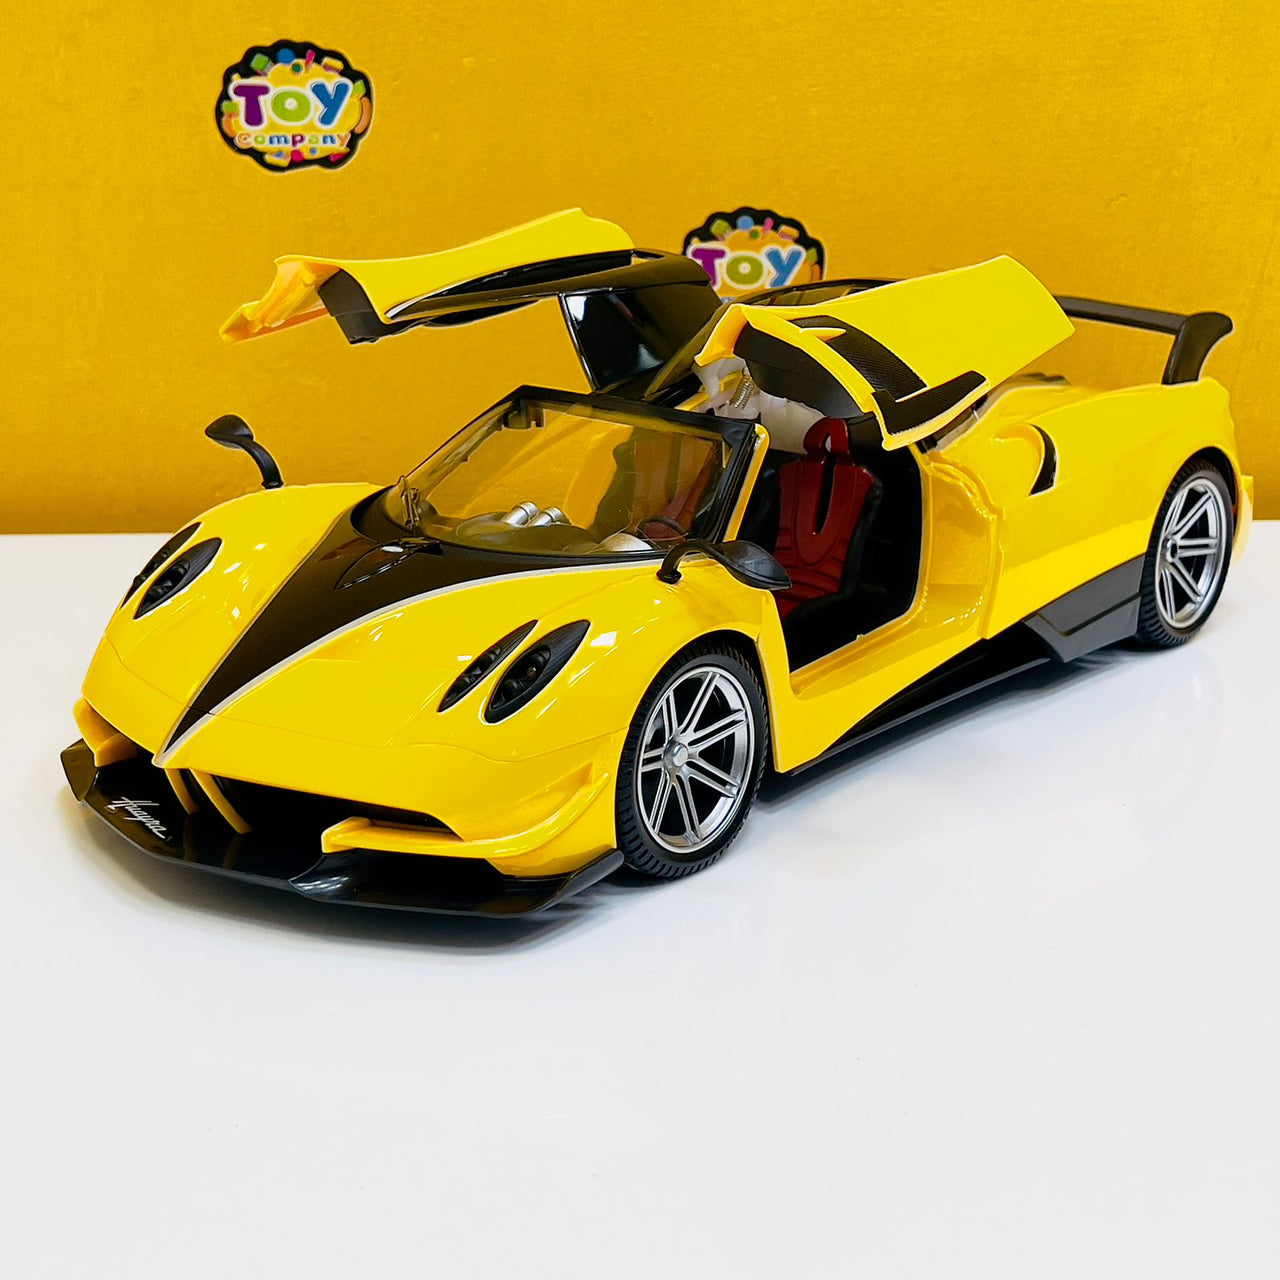 ABS 1:12 Top-Speed RC Sports Car